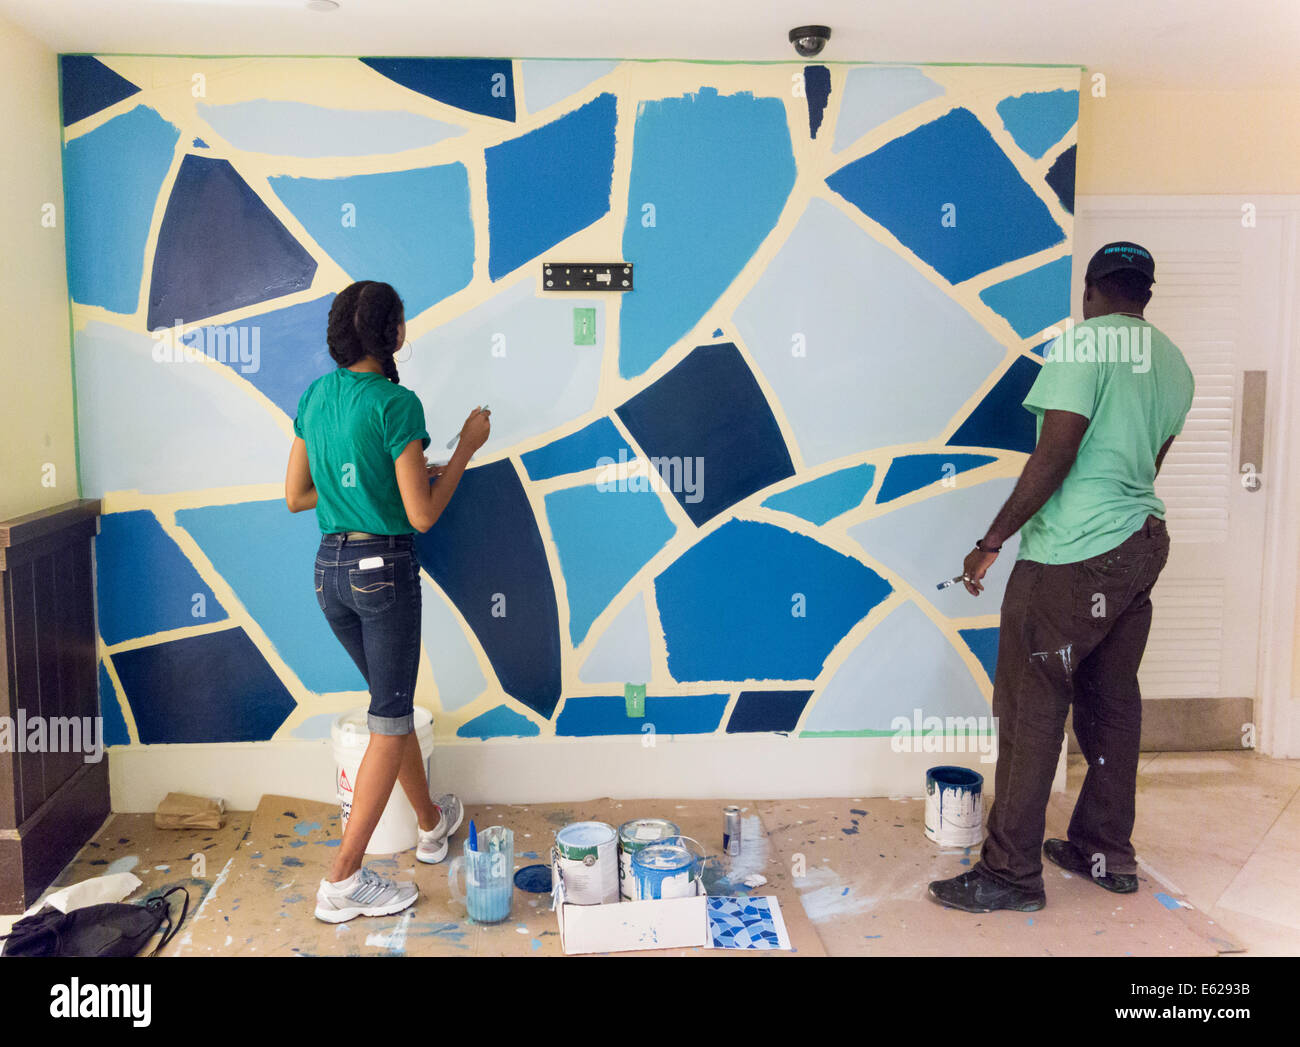 painters working on abstract image, Melia Hotel, Cable Beach, The Bahamas Stock Photo